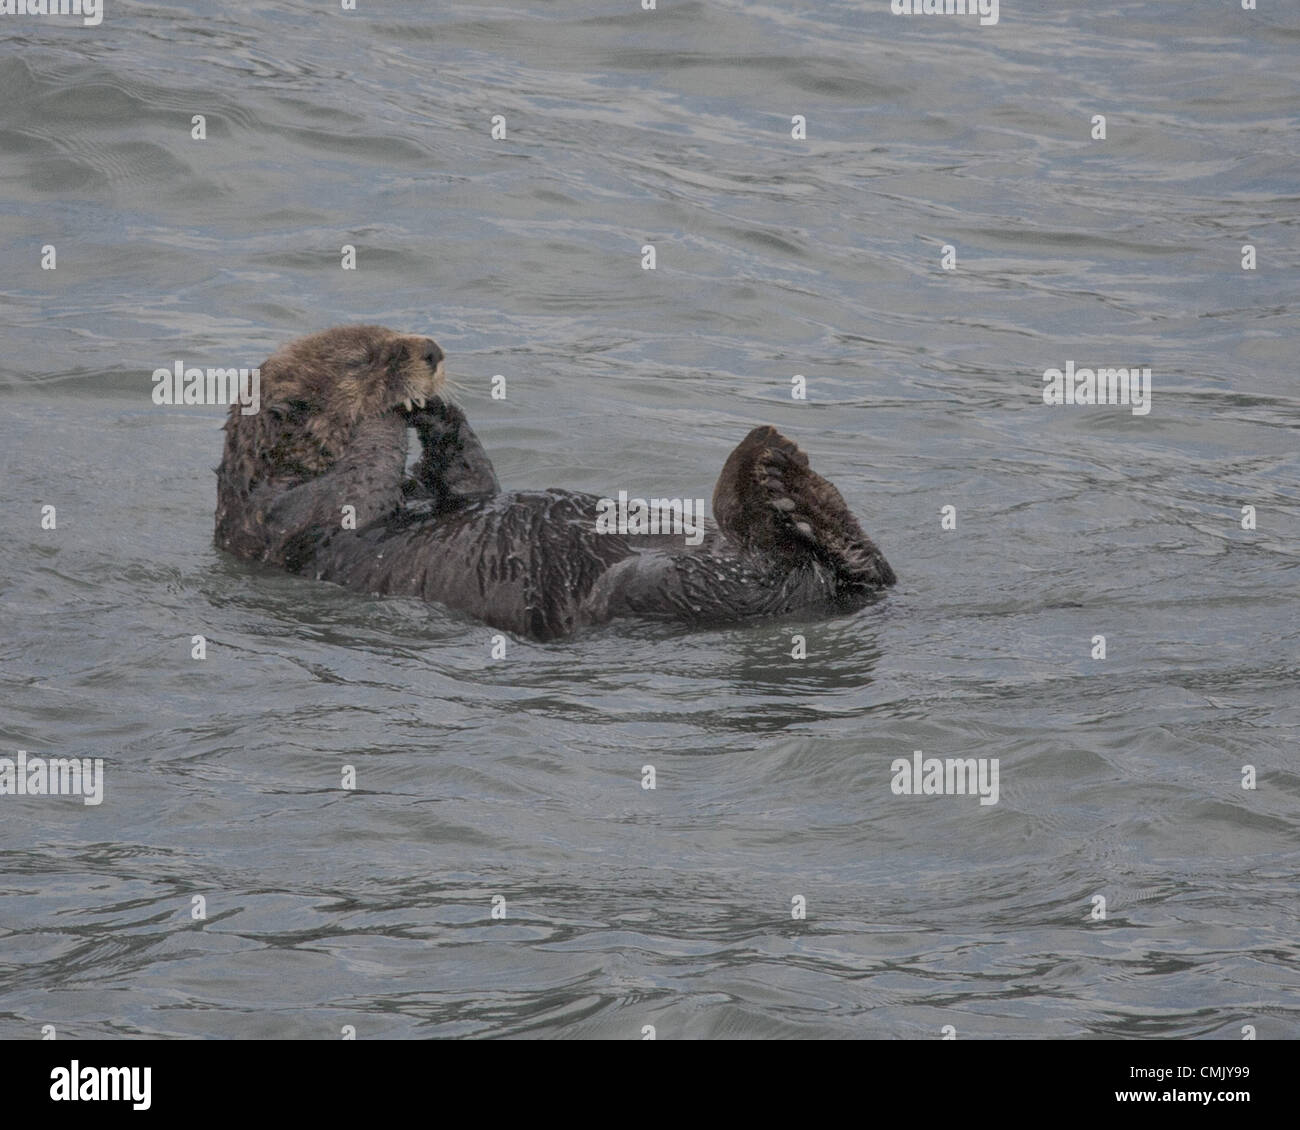 July 1, 2012 - Alaska, US - A Sea Otter (Enhydra lutris) in Alaskaâ€™s Kenai Fjords National Park Resurrection Bay. The largest member of the weasel family and the smallest marine mammal, ninety percent of the worldâ€™s sea otters live in coastal Alaska where its numbers have declined over the past 20 years and they remain classified as an endangered species. (Credit Image: © Arnold Drapkin/ZUMAPRESS.com) Stock Photo